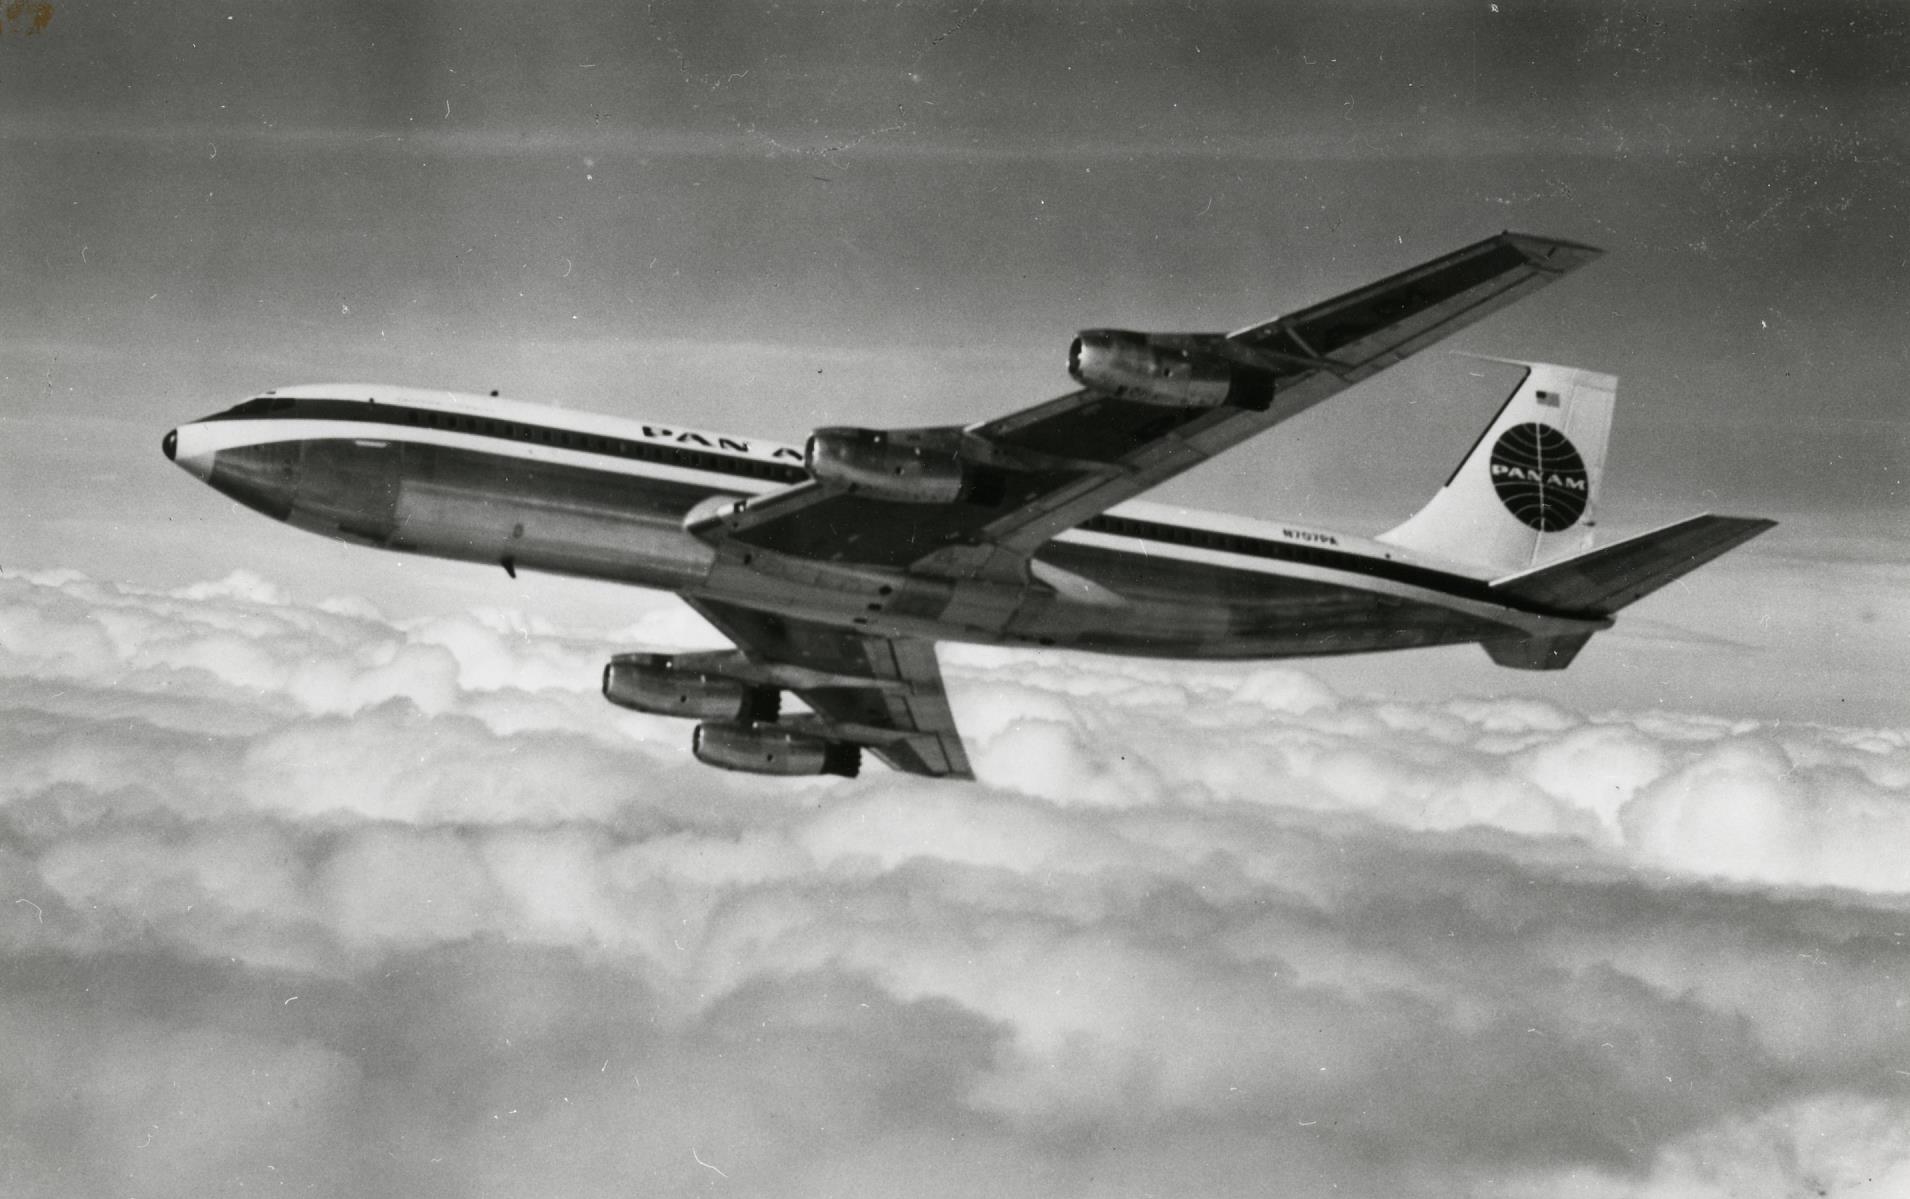 One of the Pan American jets banking right.